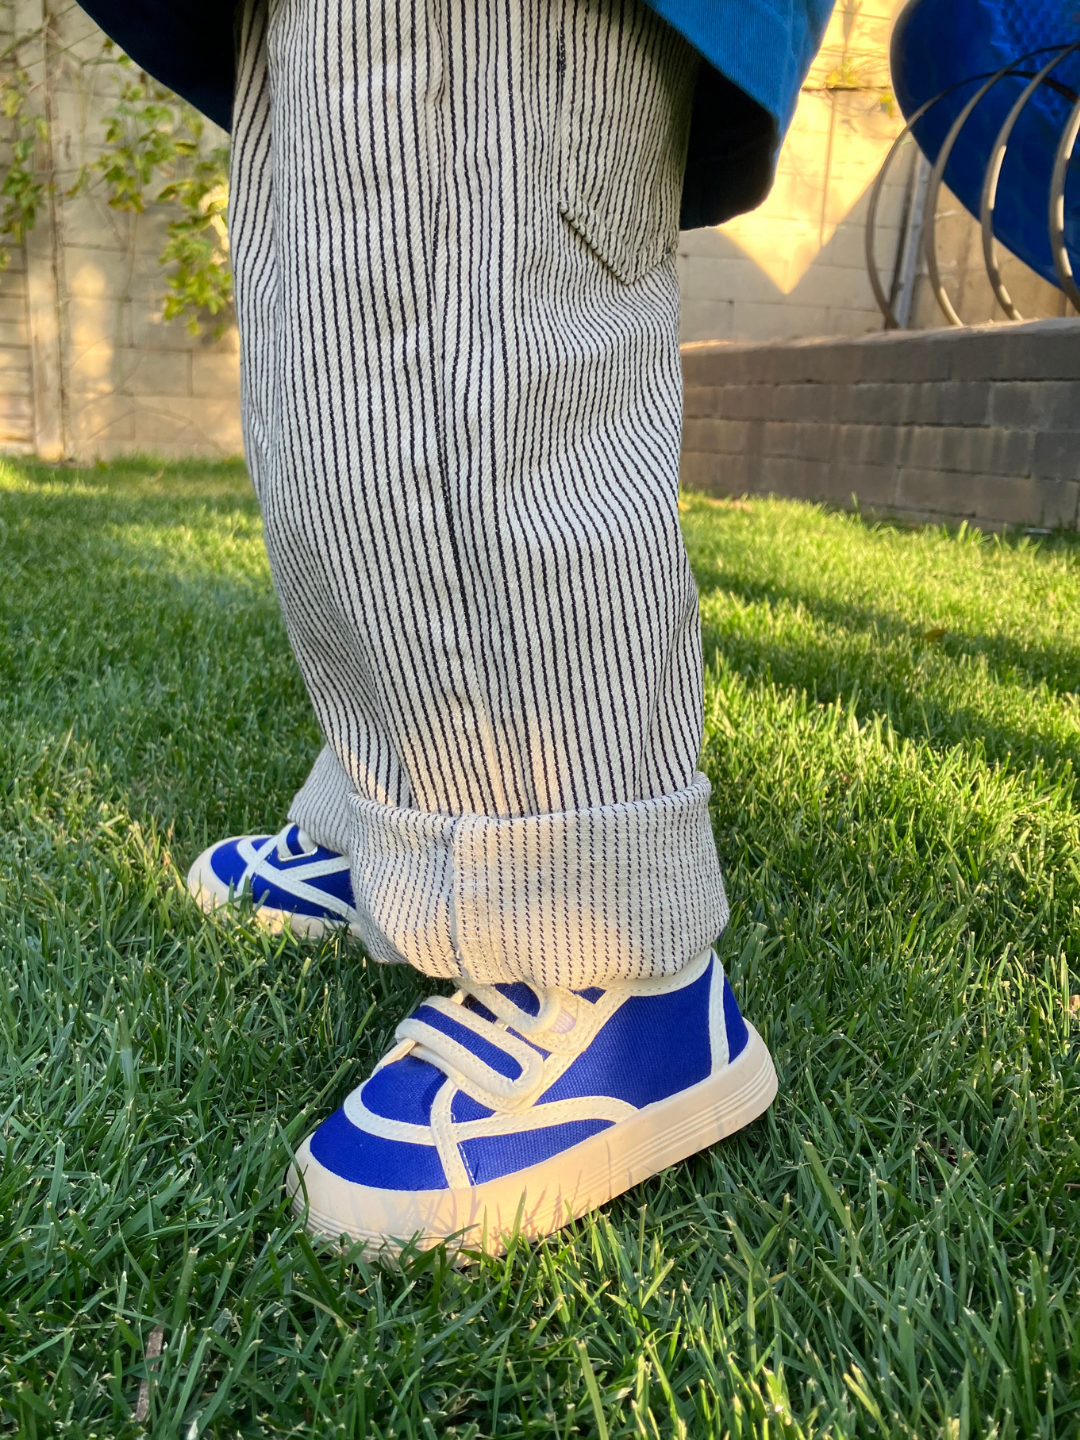 Blue | Child standing on grass wearing pair of kids' sneakers in blue with white trim